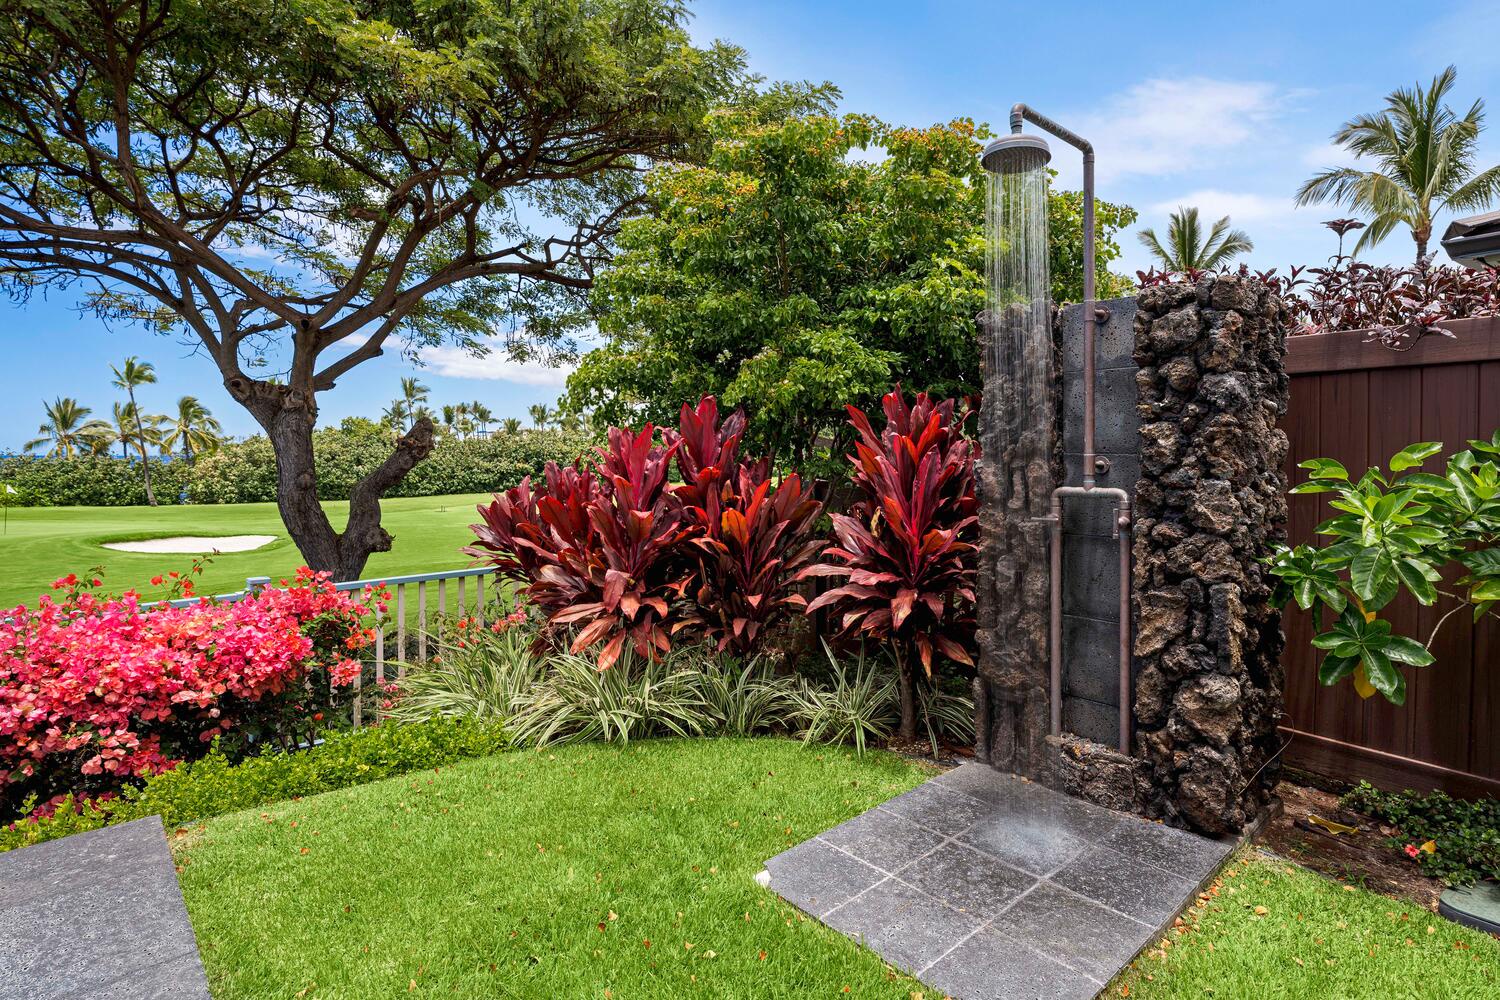 Kailua-Kona Vacation Rentals, Holua Kai #26 - Outdoor shower surrounded by lush plants and a view of the golf course.